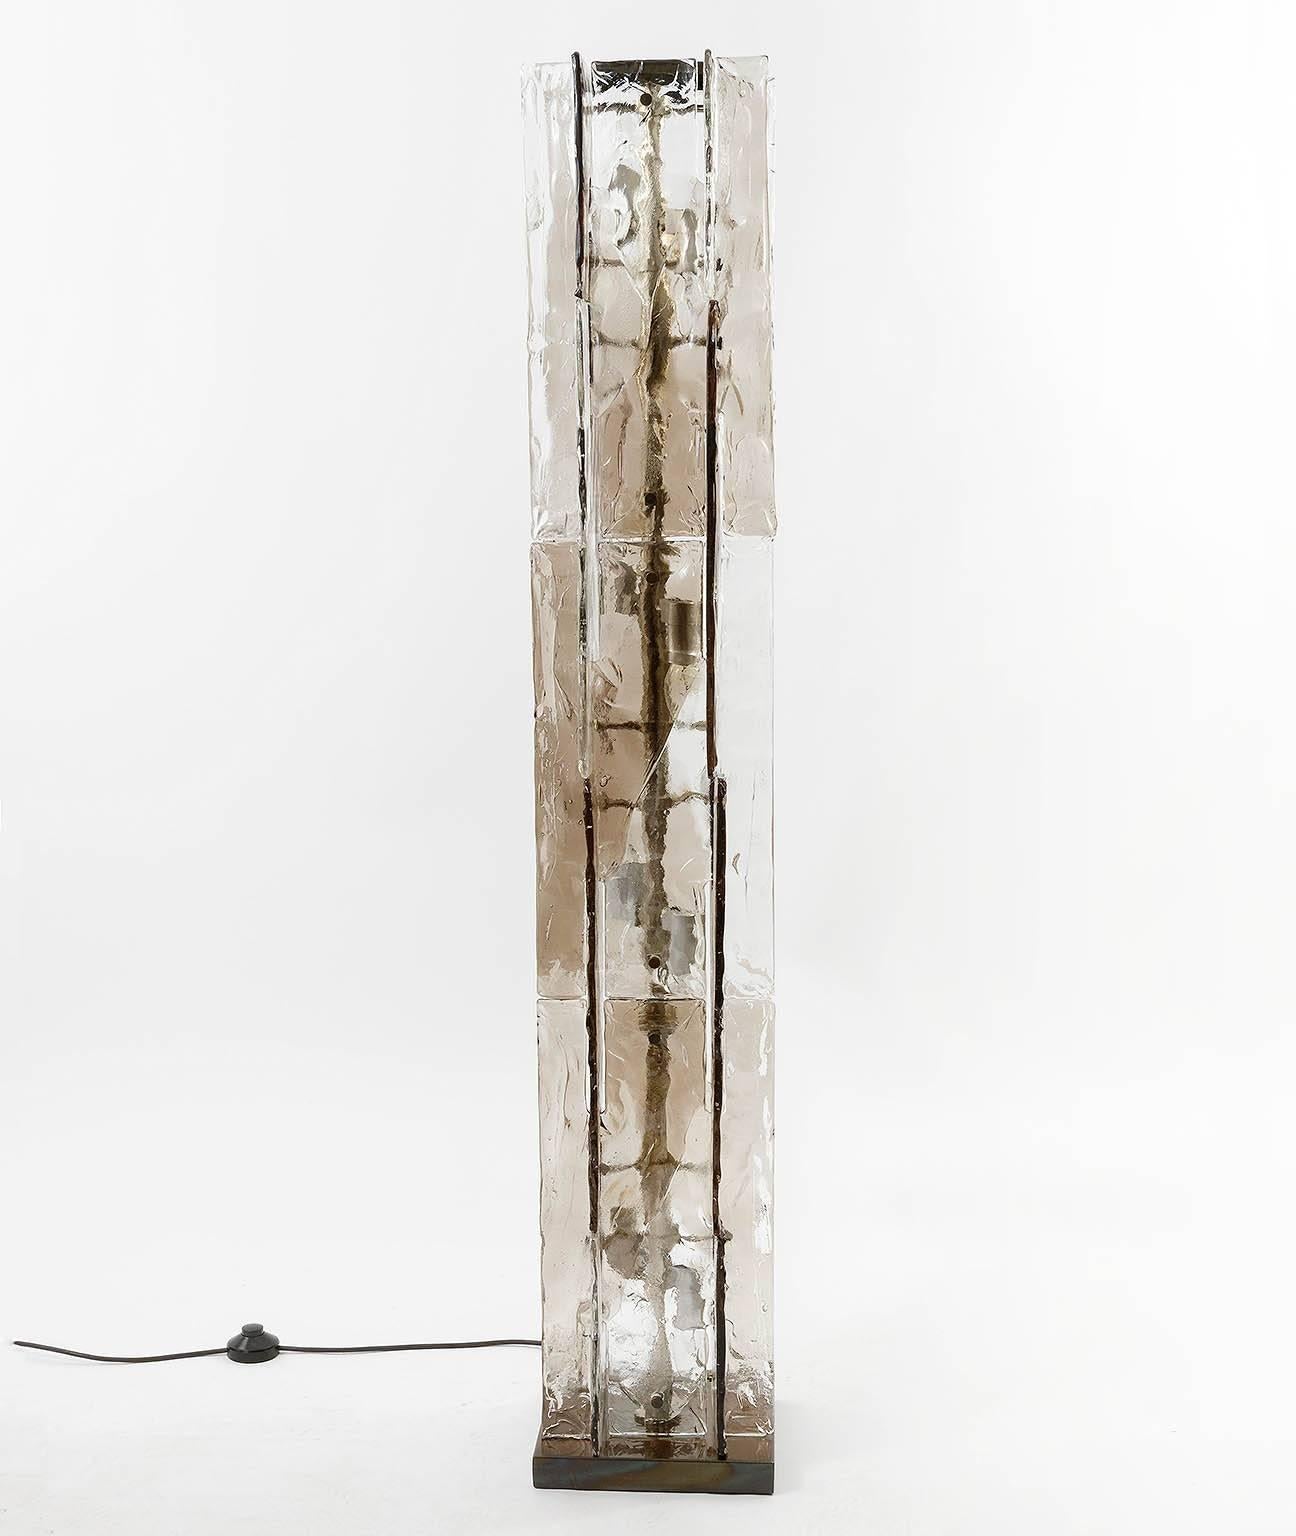 A beautiful Italian modernist floor lamp by Carlo Nason for Mazzega, manufactured in Mid-Century, circa 1970 (late 1960s or early 1970s). 
A metal frame holds several interlocking smoke and clear Murano glasses. It takes eight small screw base E14